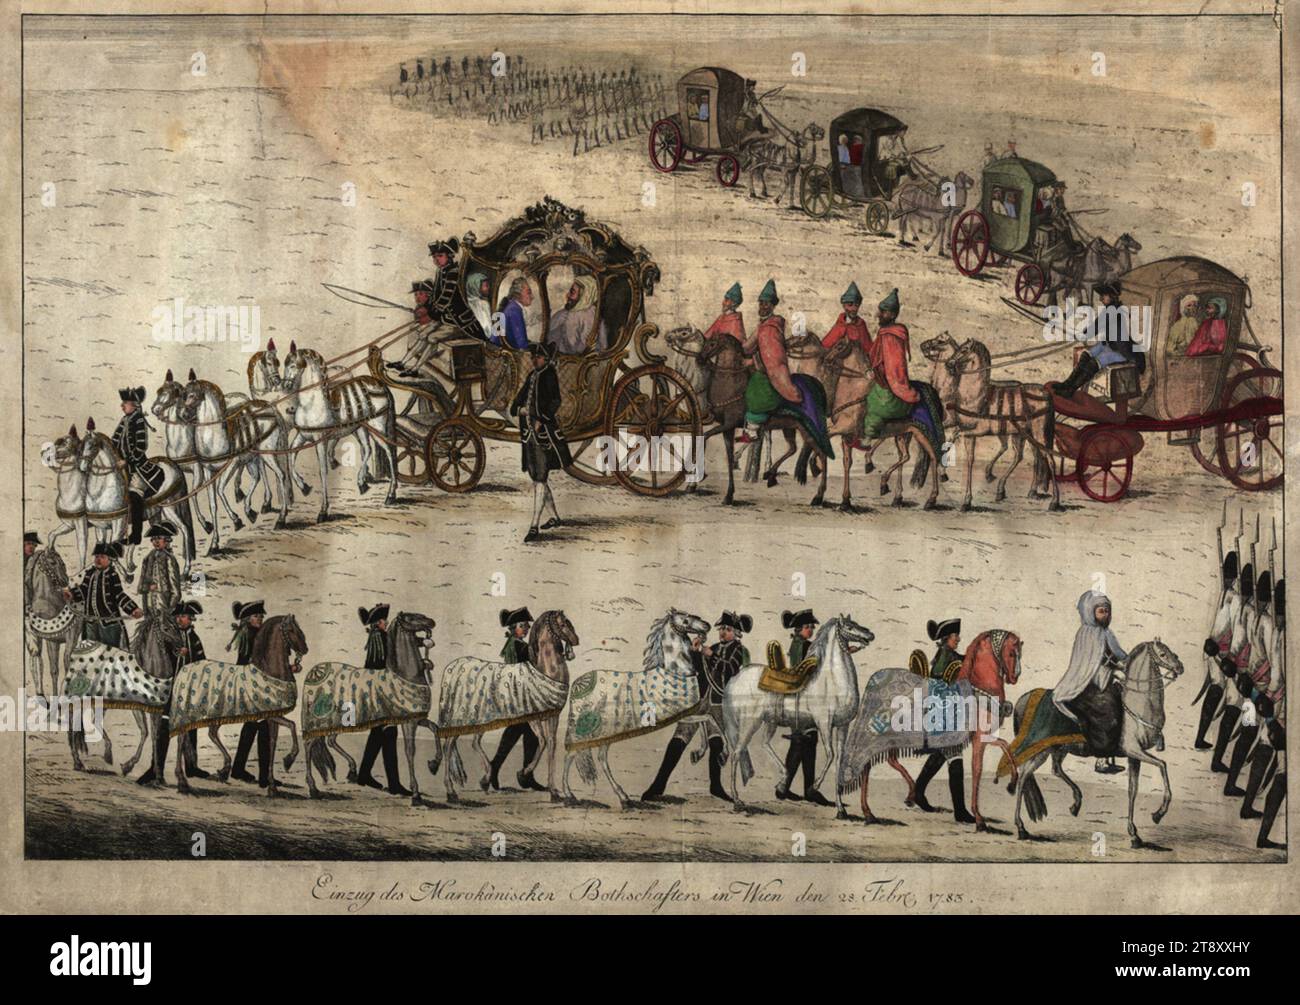 Arrival of the Moroccan ambassador in Vienna 28 February 1783, Johann Hieronymus Löschenkohl (1753-1807), publishing house, 1783, paper, colorised, copperplate engraving, sheet size 38, 5×53, 5 cm, inscription, mi. u.: Entry of the Moroccan ambassador into Vienna 28 Feb. 1783, Politics, International Relations, Fine Arts, ambassador, four-wheeled, animal-drawn vehicle, e.g.: cab, carriage, coach, voyage  ambassador, The Vienna Collection Stock Photo